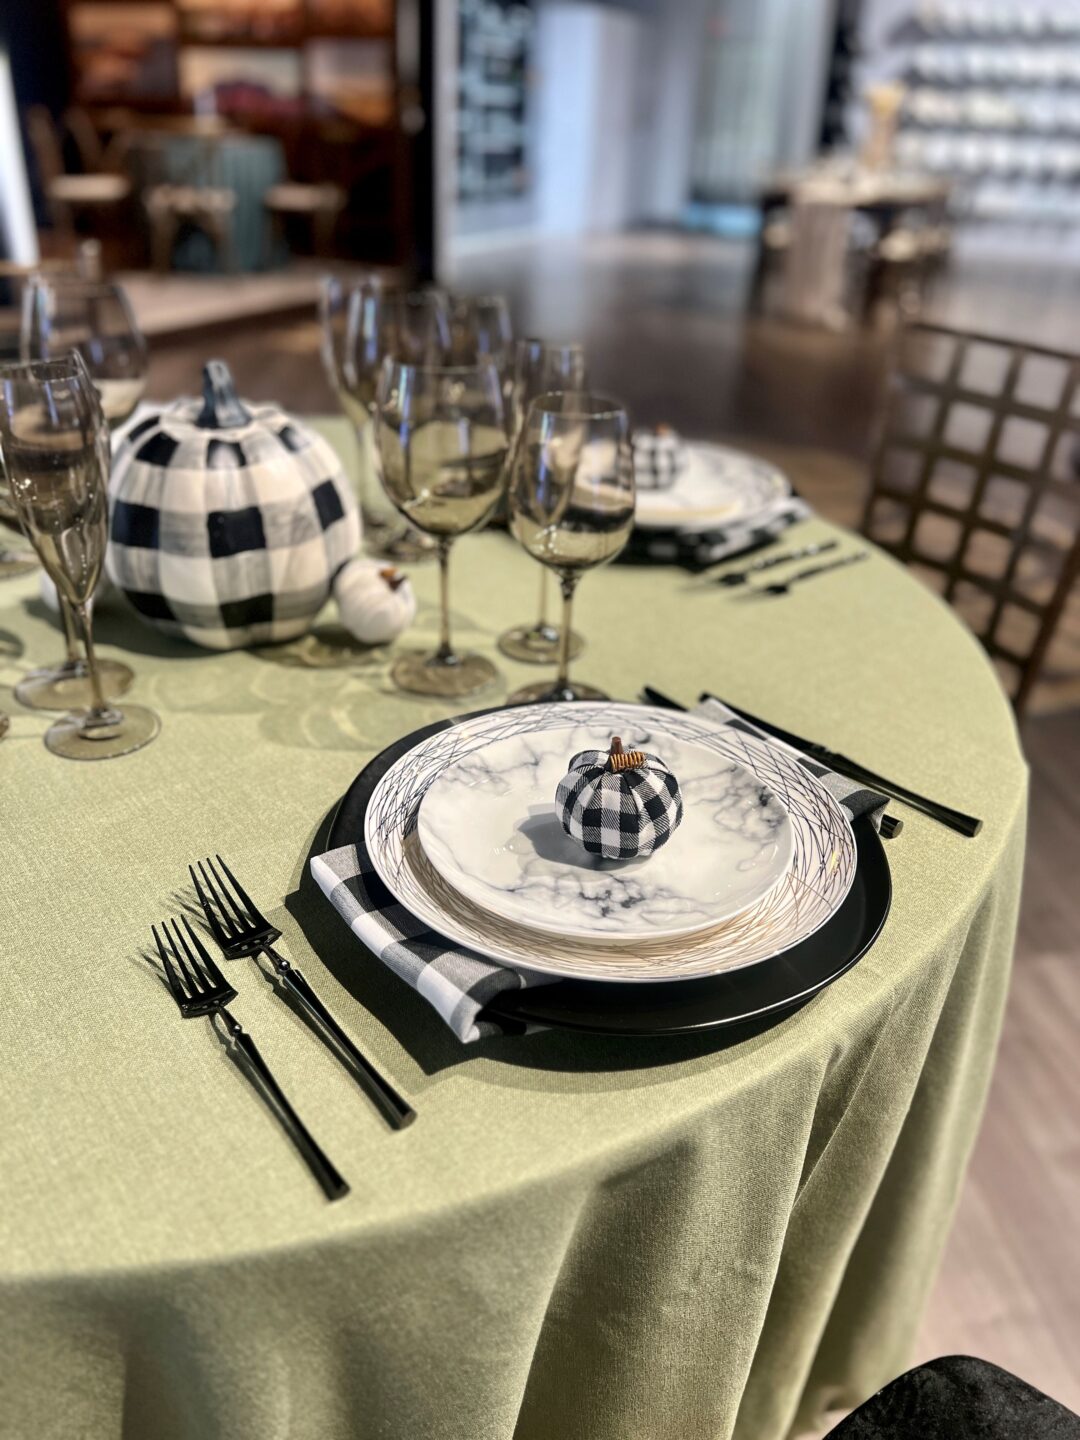 fall tablesetting with greens and black checkered complete with linen, base plates, china,napkins, glassware, flatware and decor of black and white checkered pumpkins